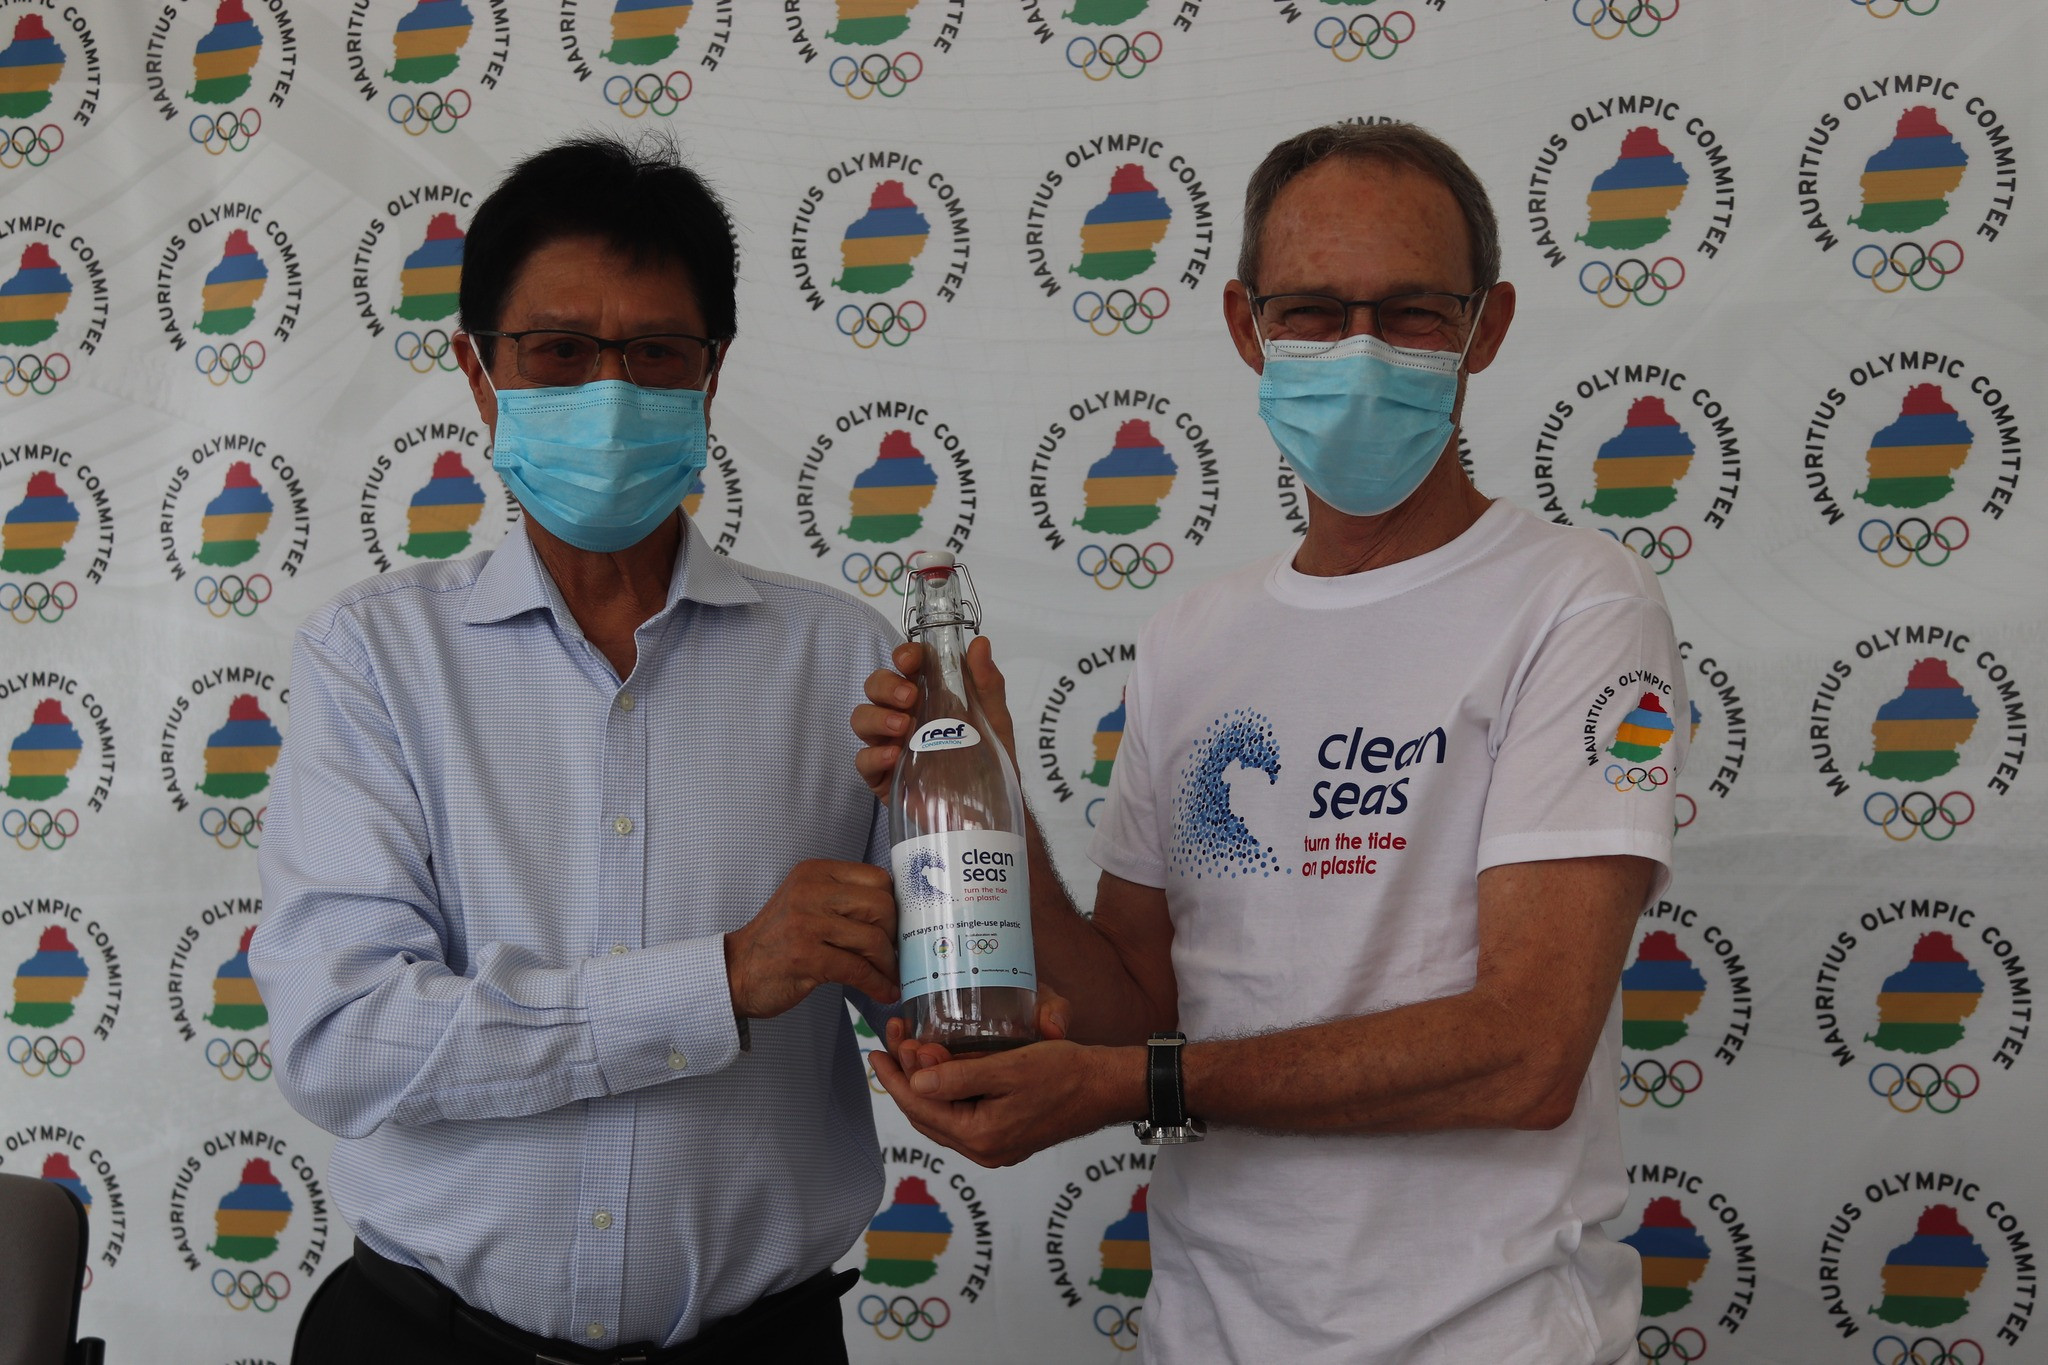 Mauritius Olympic Committee President Philippe Hao Thyn Voon Ha Shun, left, poses with a reusable bottle ©Facebook/Mauritius Olympic Committee